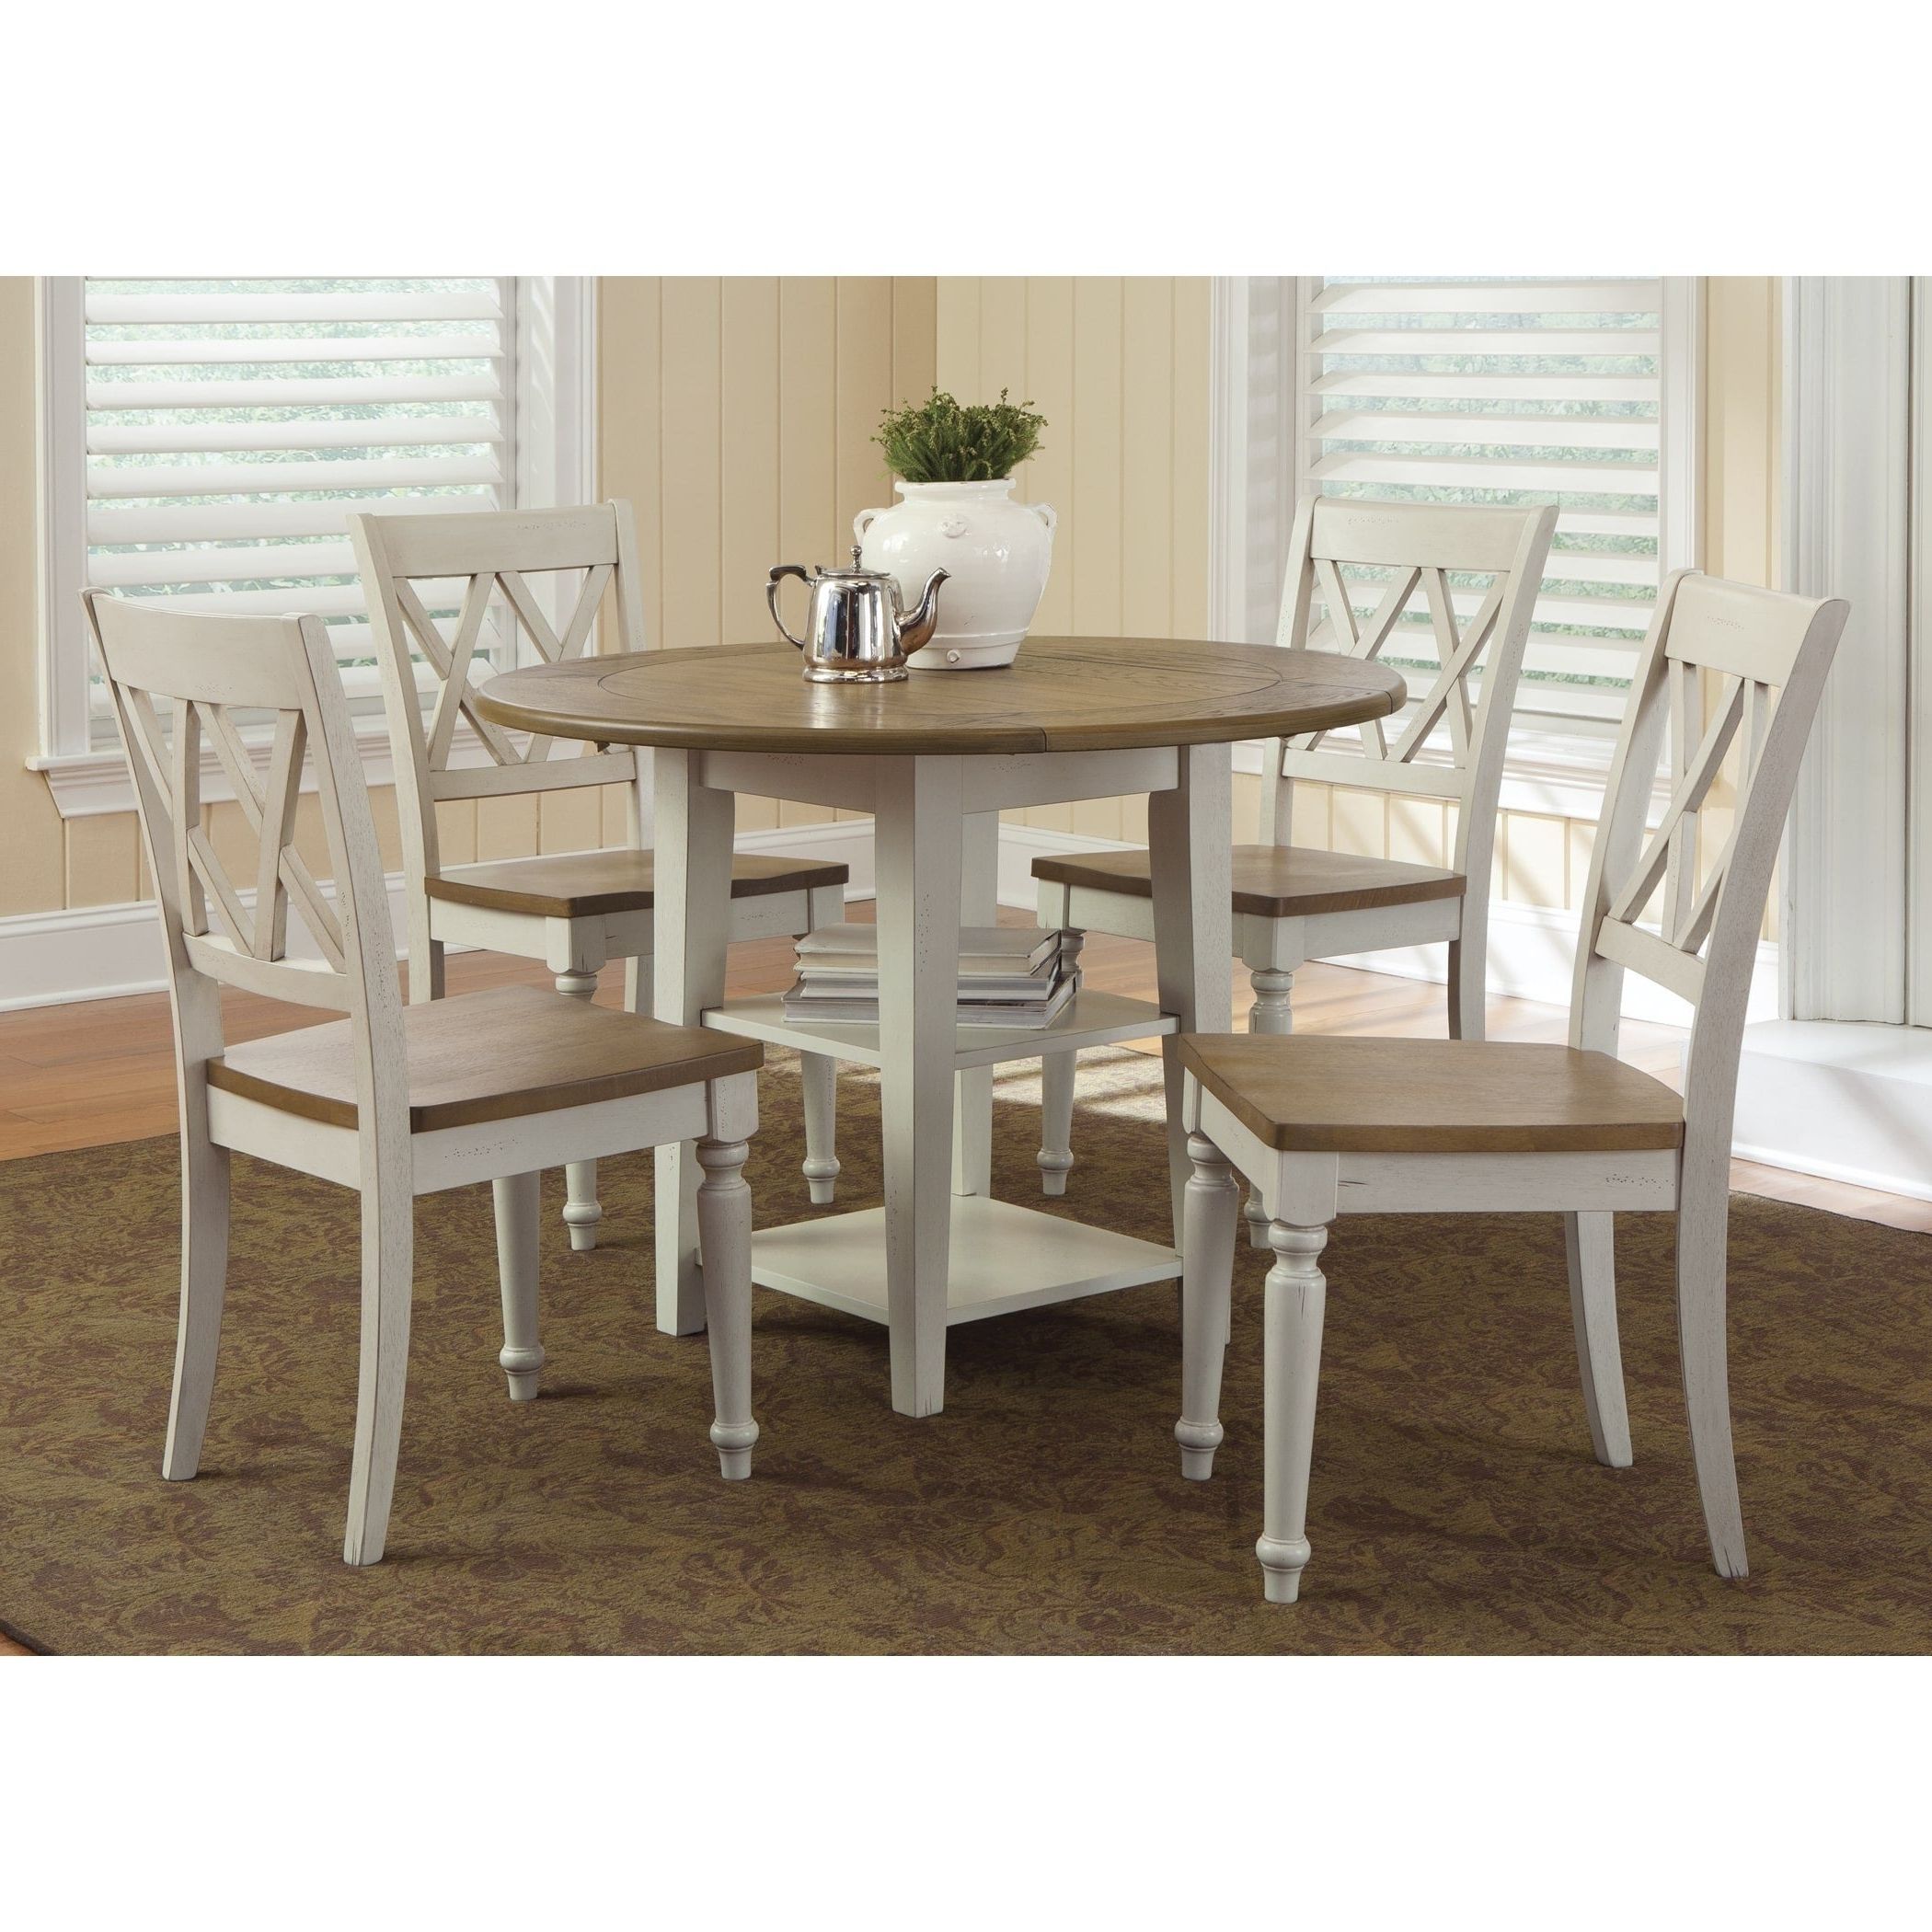 Al Fresco Two Tone Transitional Drop Leaf Leg Table – Antique White Inside 2019 Transitional Antique Walnut Drop Leaf Casual Dining Tables (Photo 21 of 25)